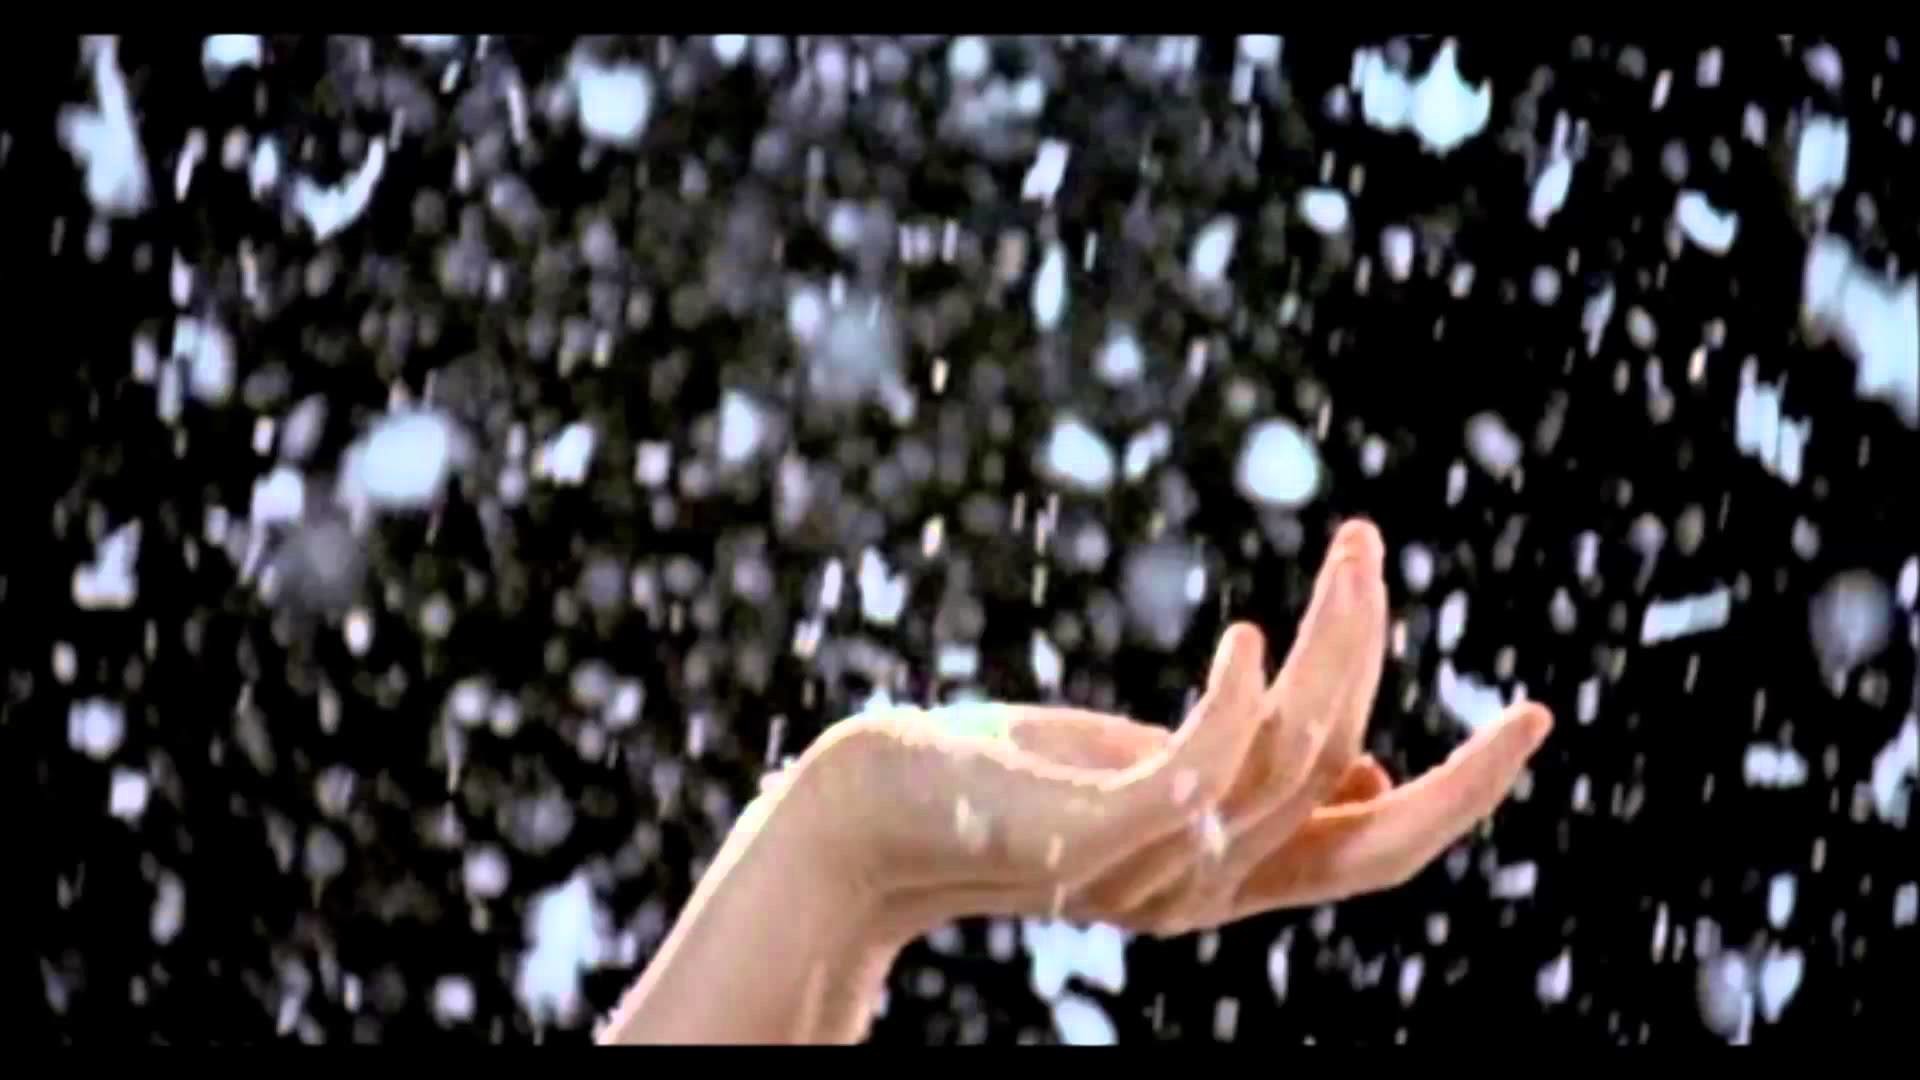 1920x1080 Dean Kerr Cover: "The Ice Dance" by Danny Elfman from "Edward Scissorhands"